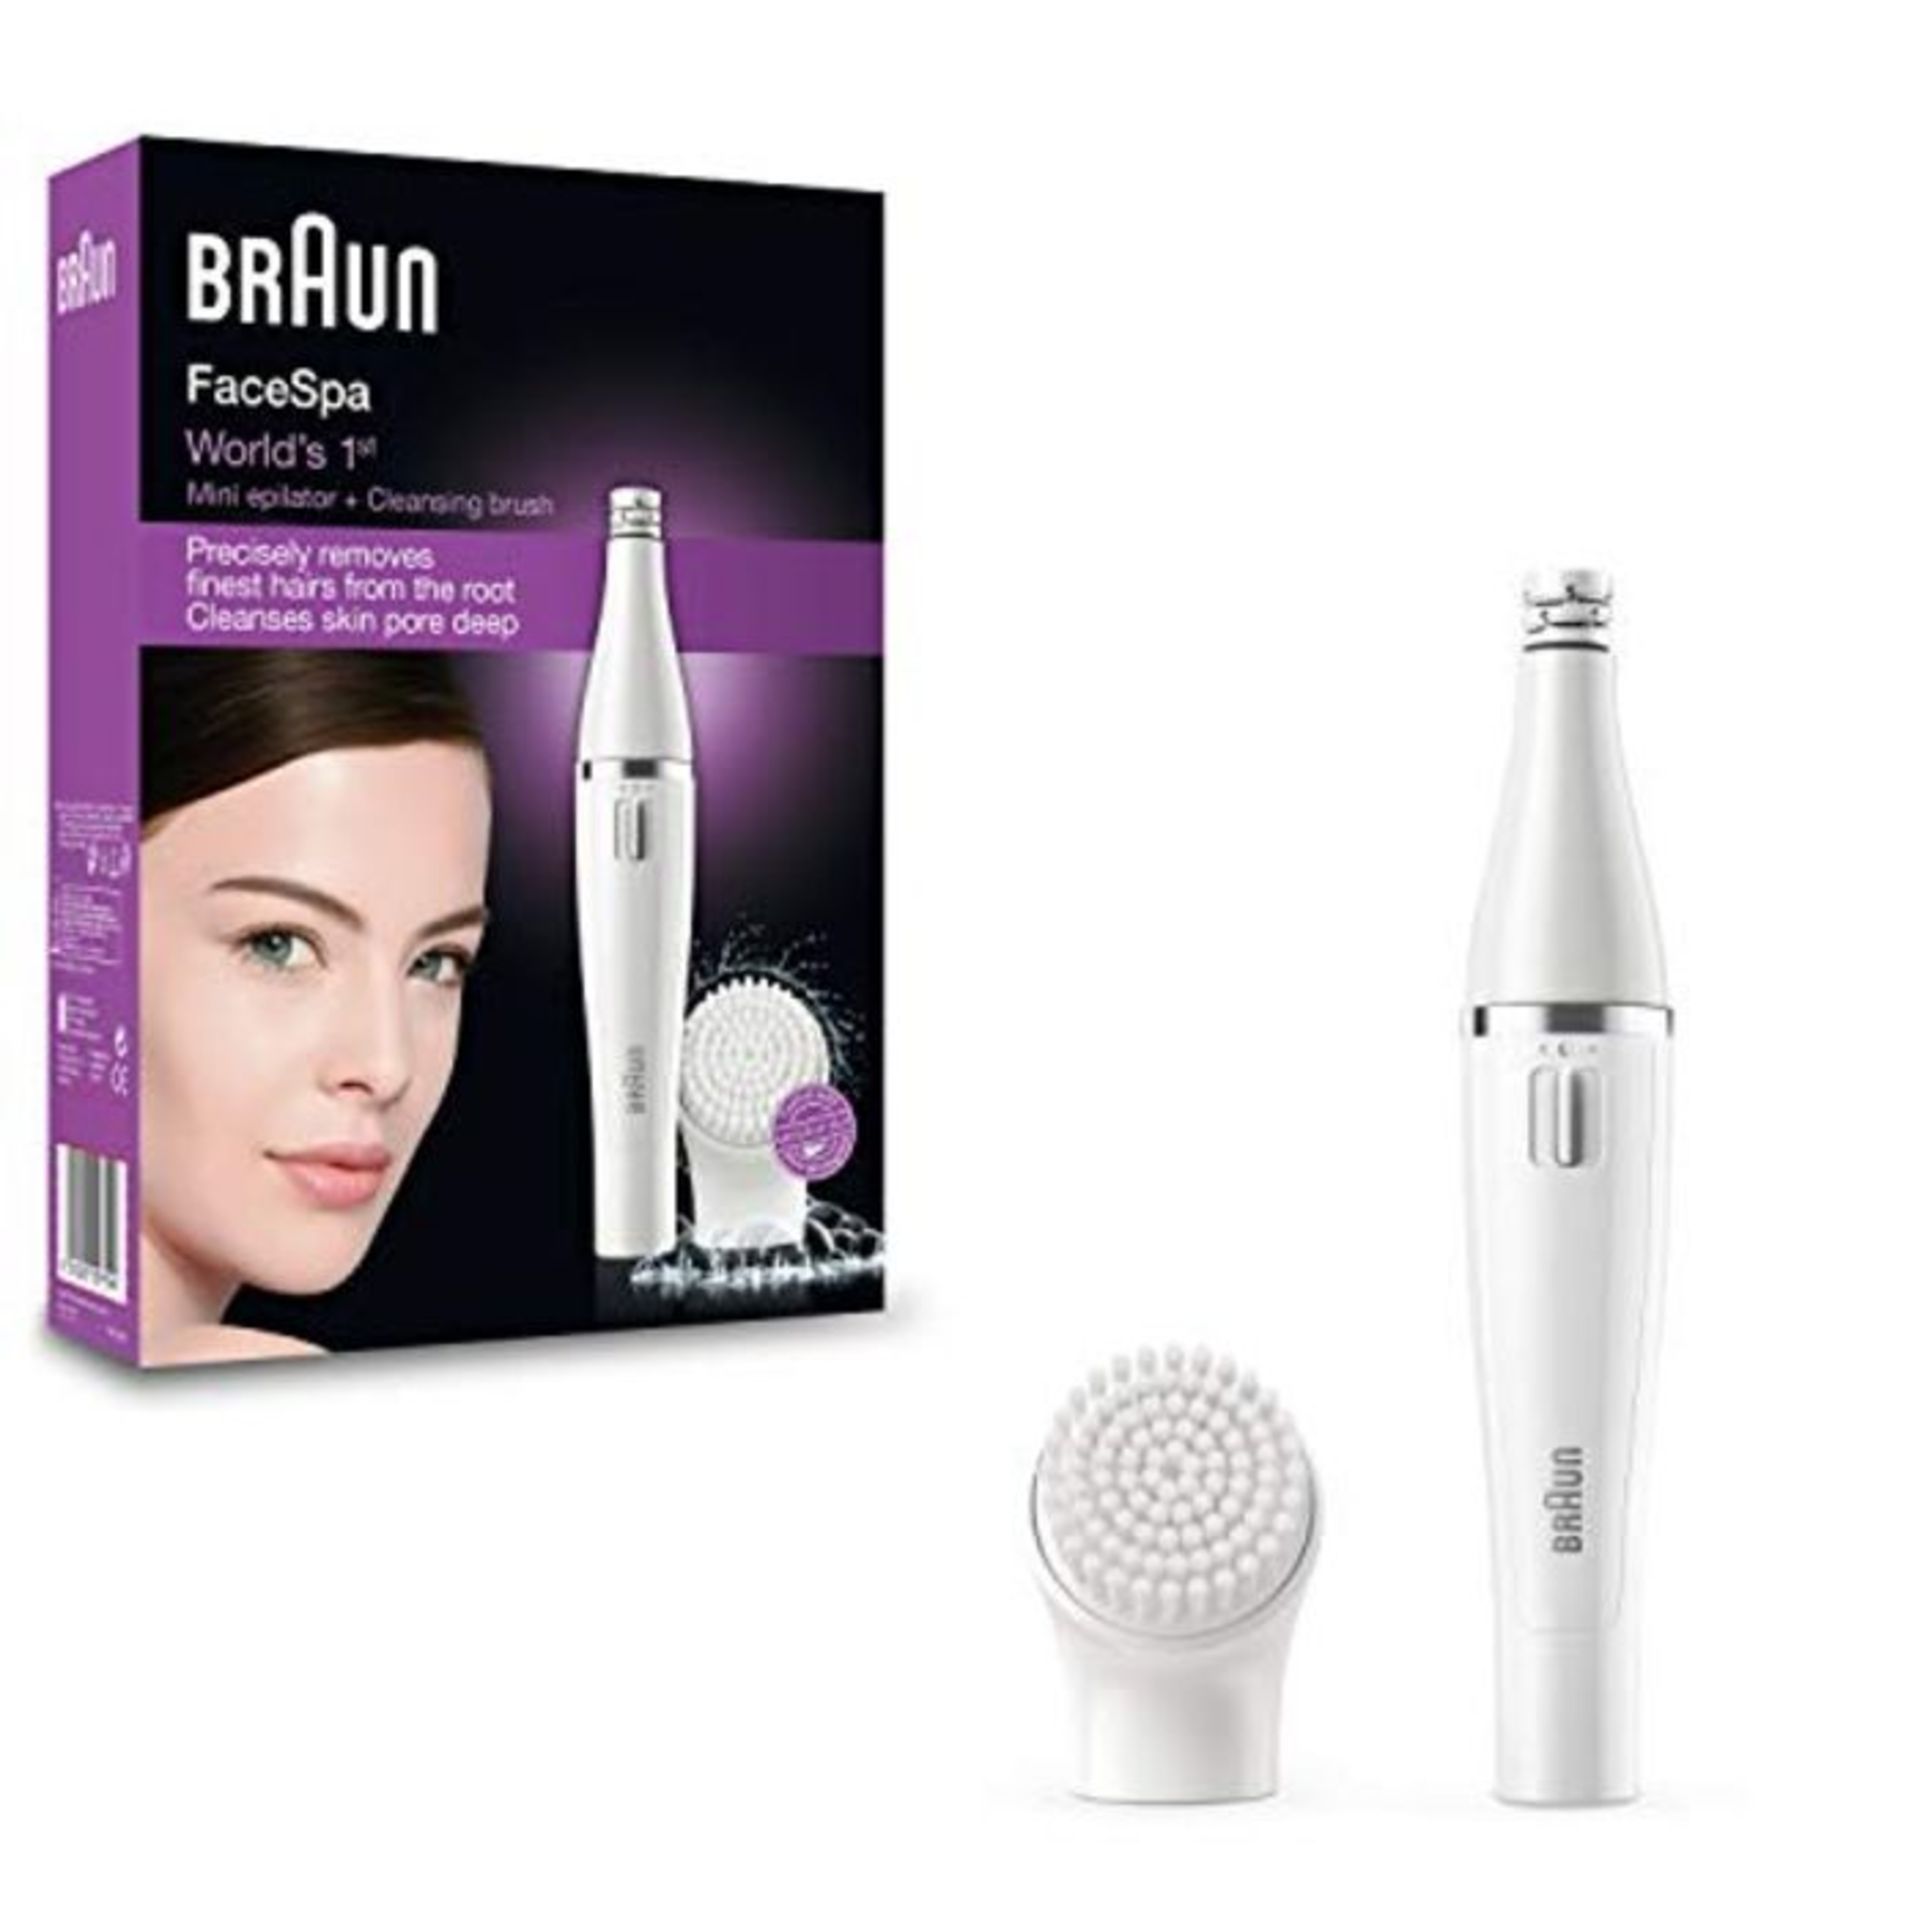 Braun Face 810 Facial Epilator, Hair Removal and Facial Cleansing, with Additional Bru